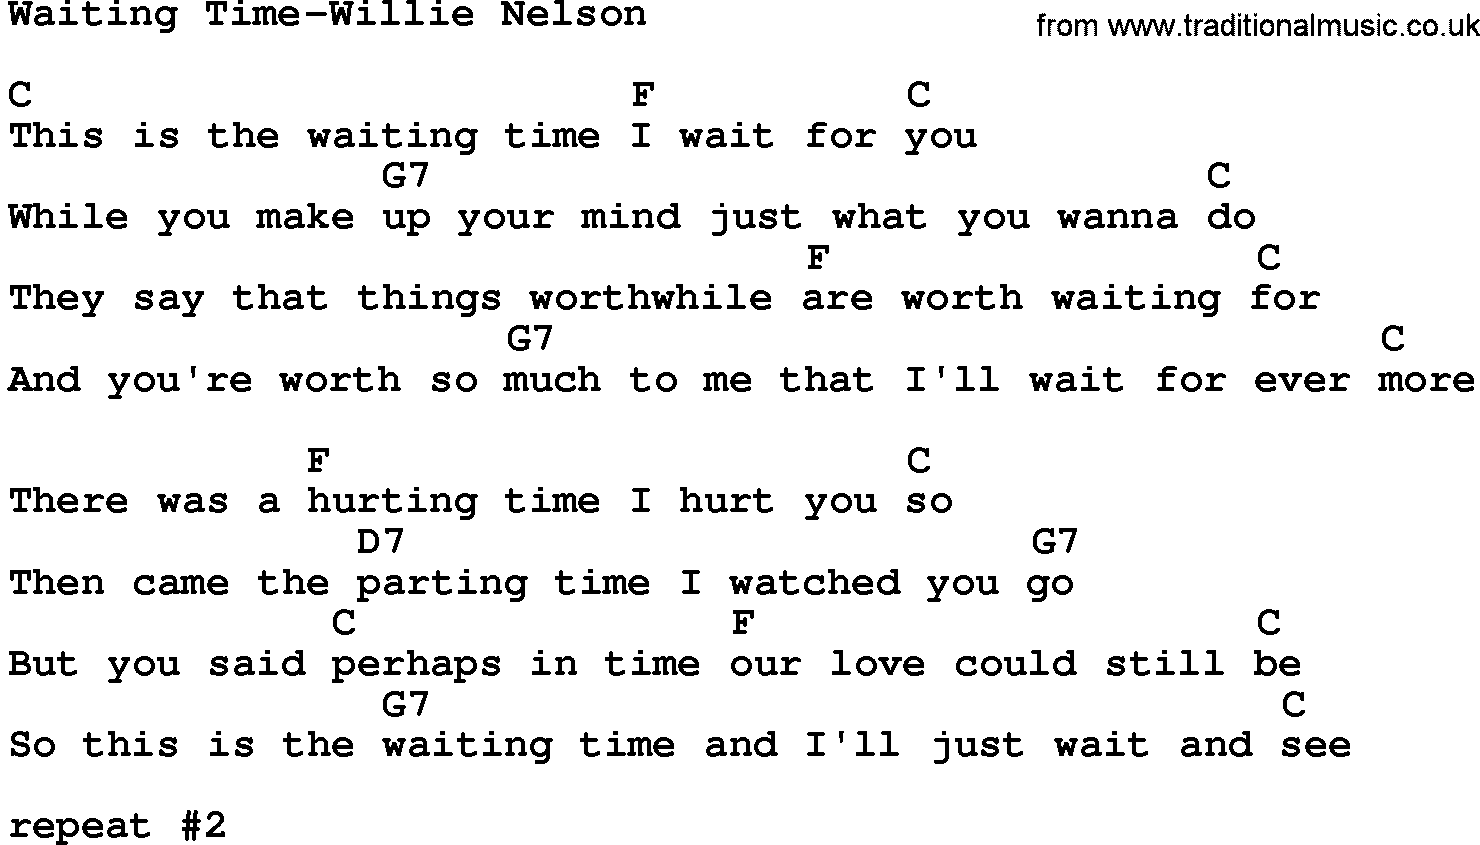 Country music song: Waiting Time-Willie Nelson lyrics and chords